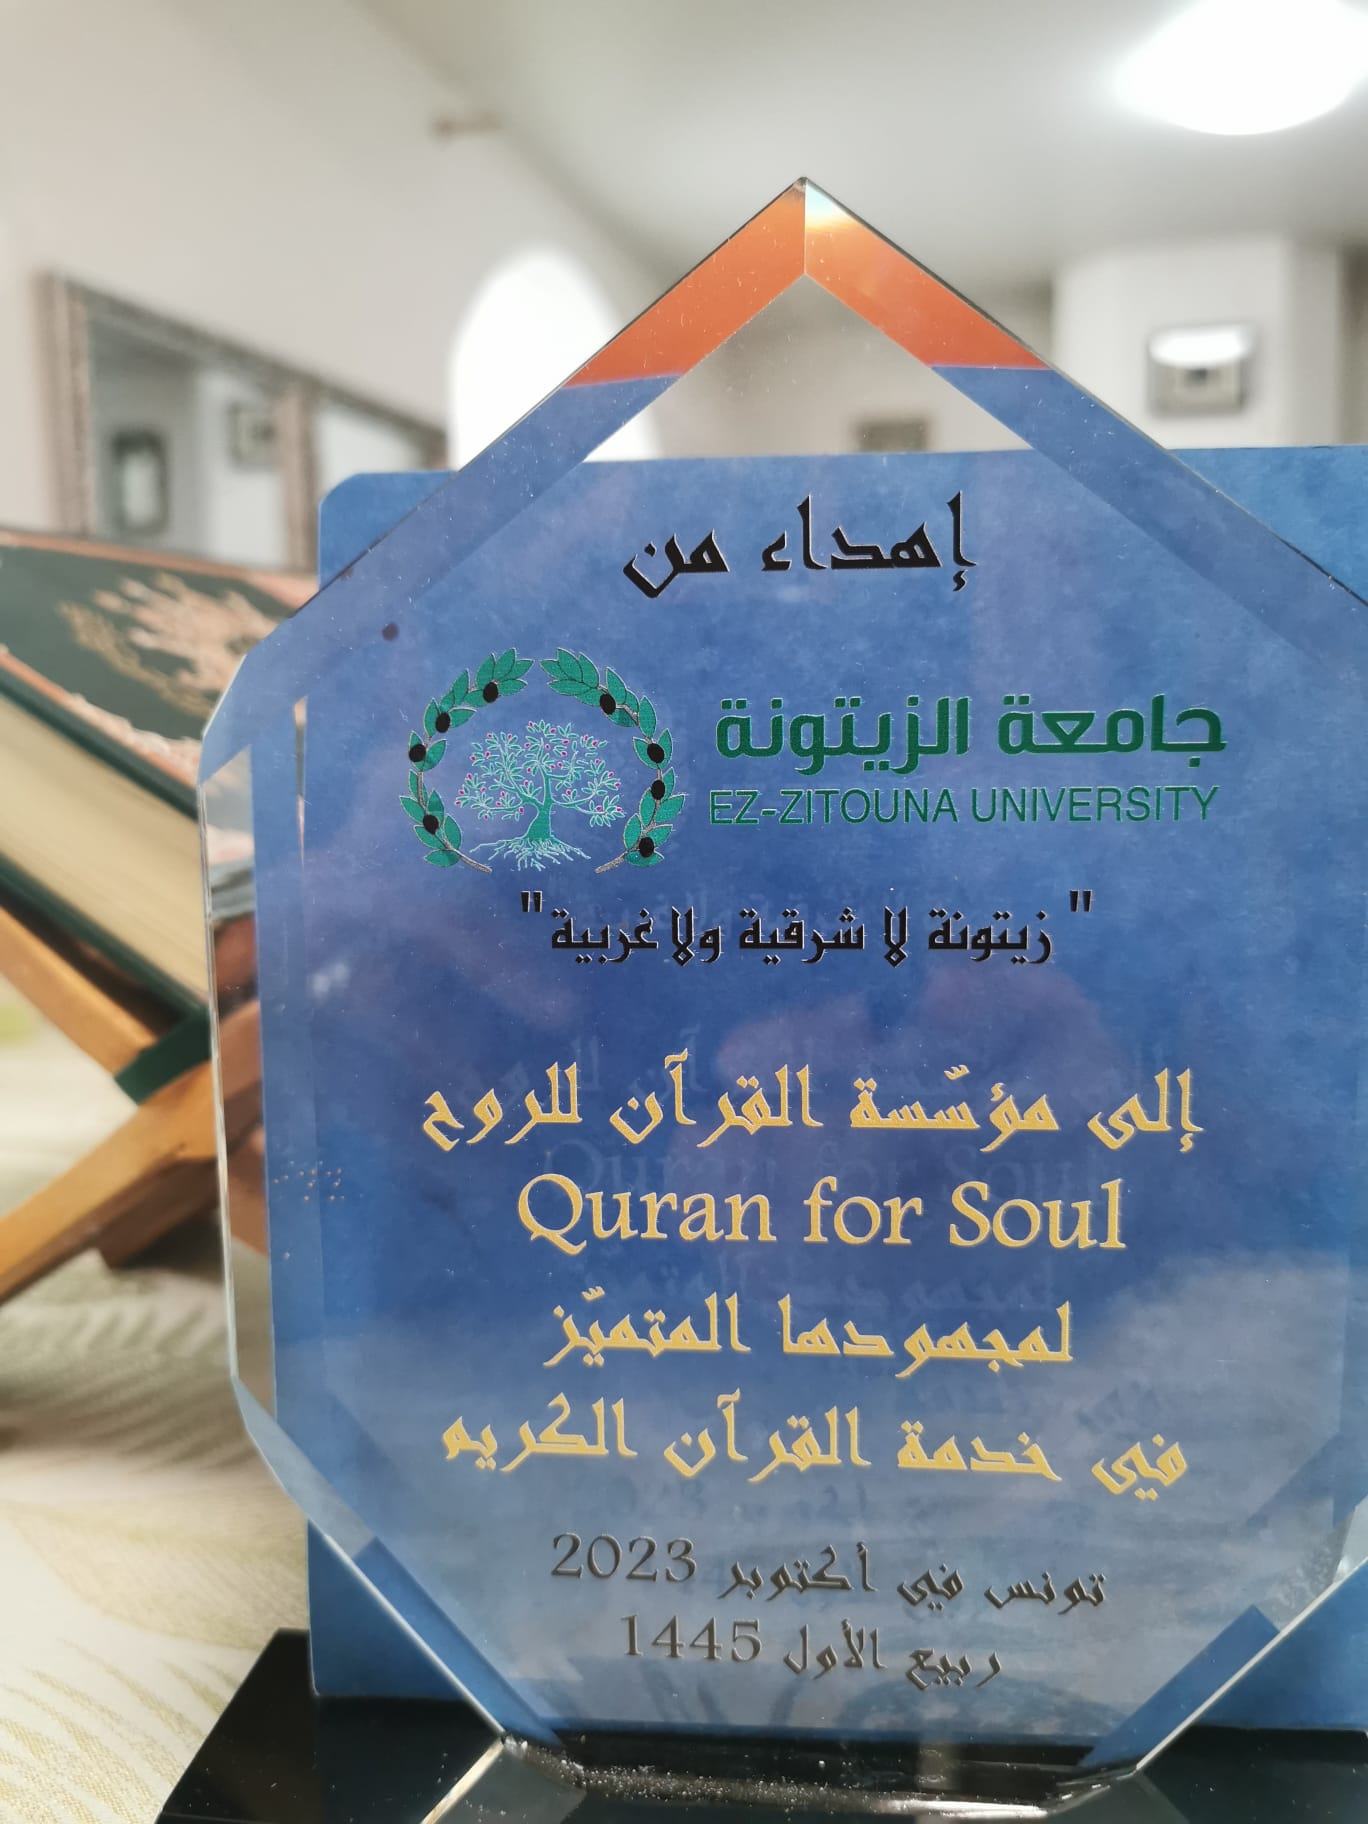 QuranForSoul Foundation Honored by Ezzeitouna University for its Commitment to the Holy Quran, Upholding the University's Illustrious Tradition